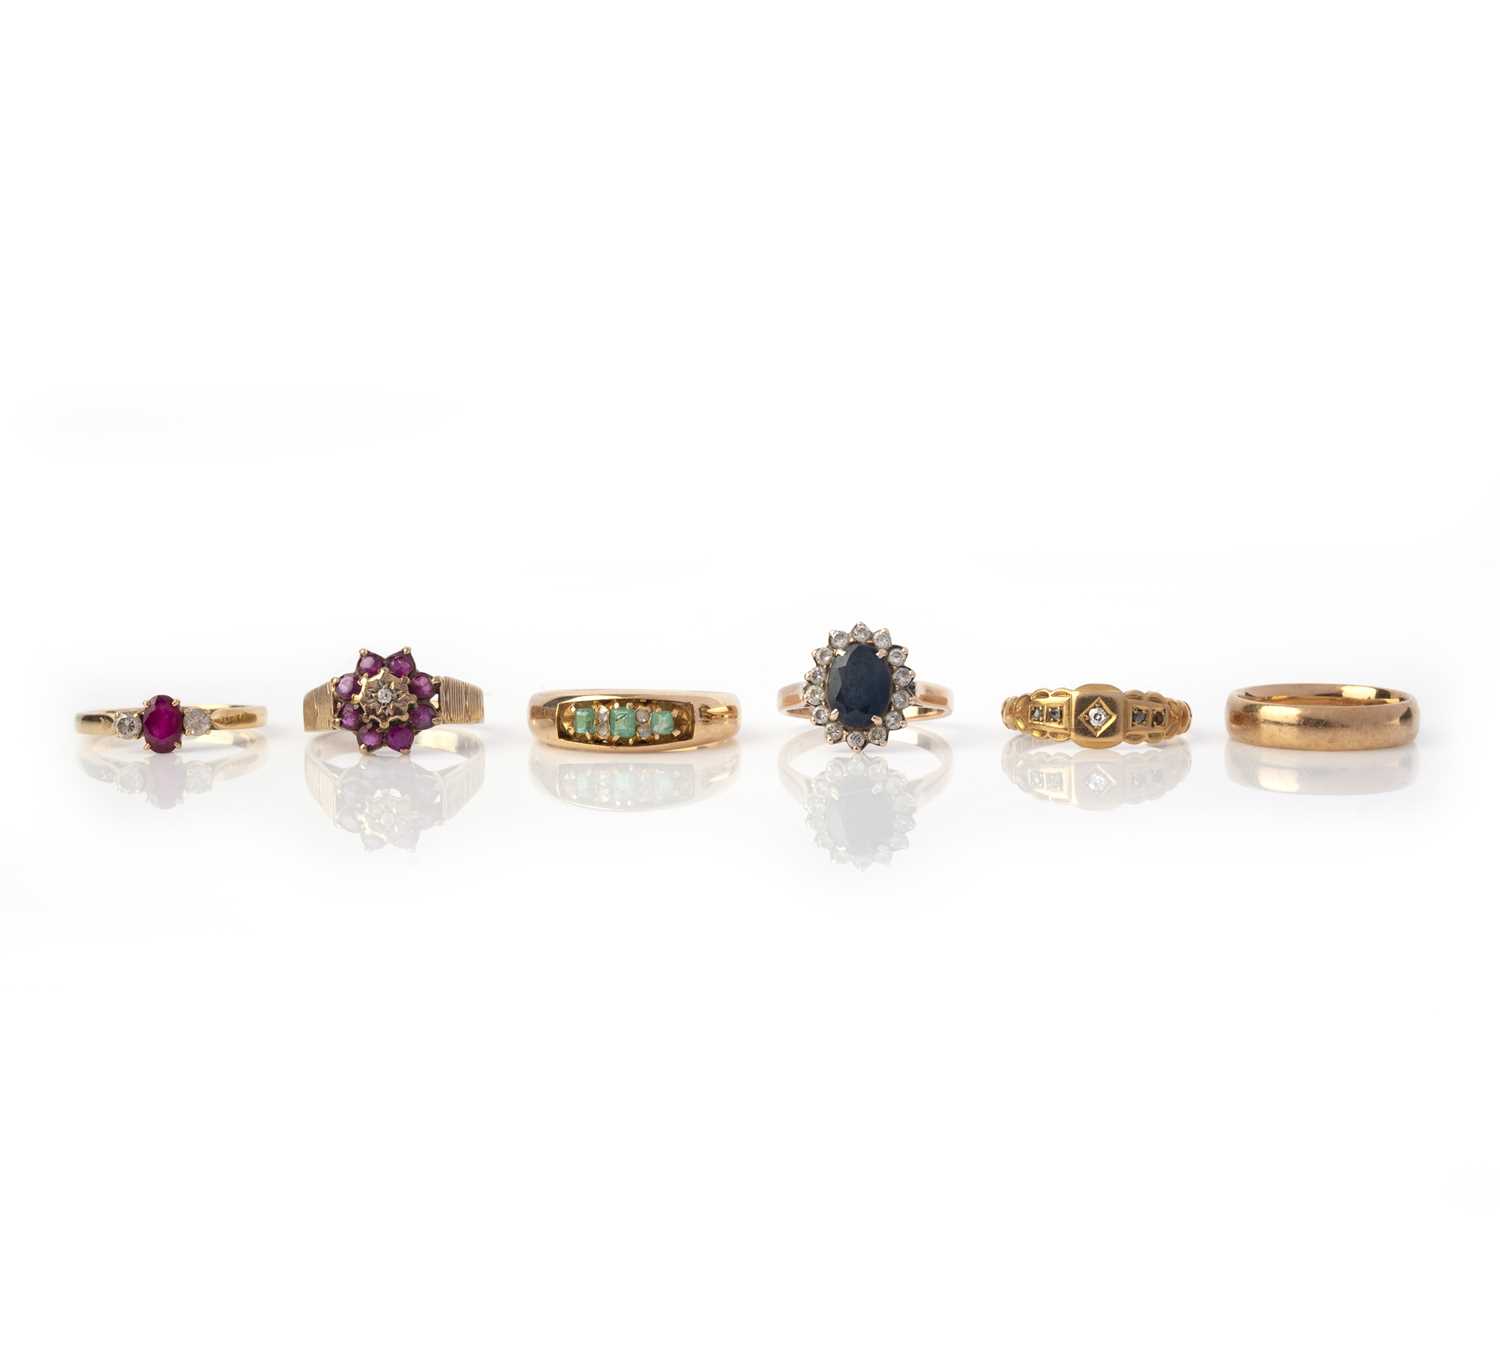 Six gold and gem-set rings, comprising: a 15ct gold ring set with step-cut emeralds and rose-cut